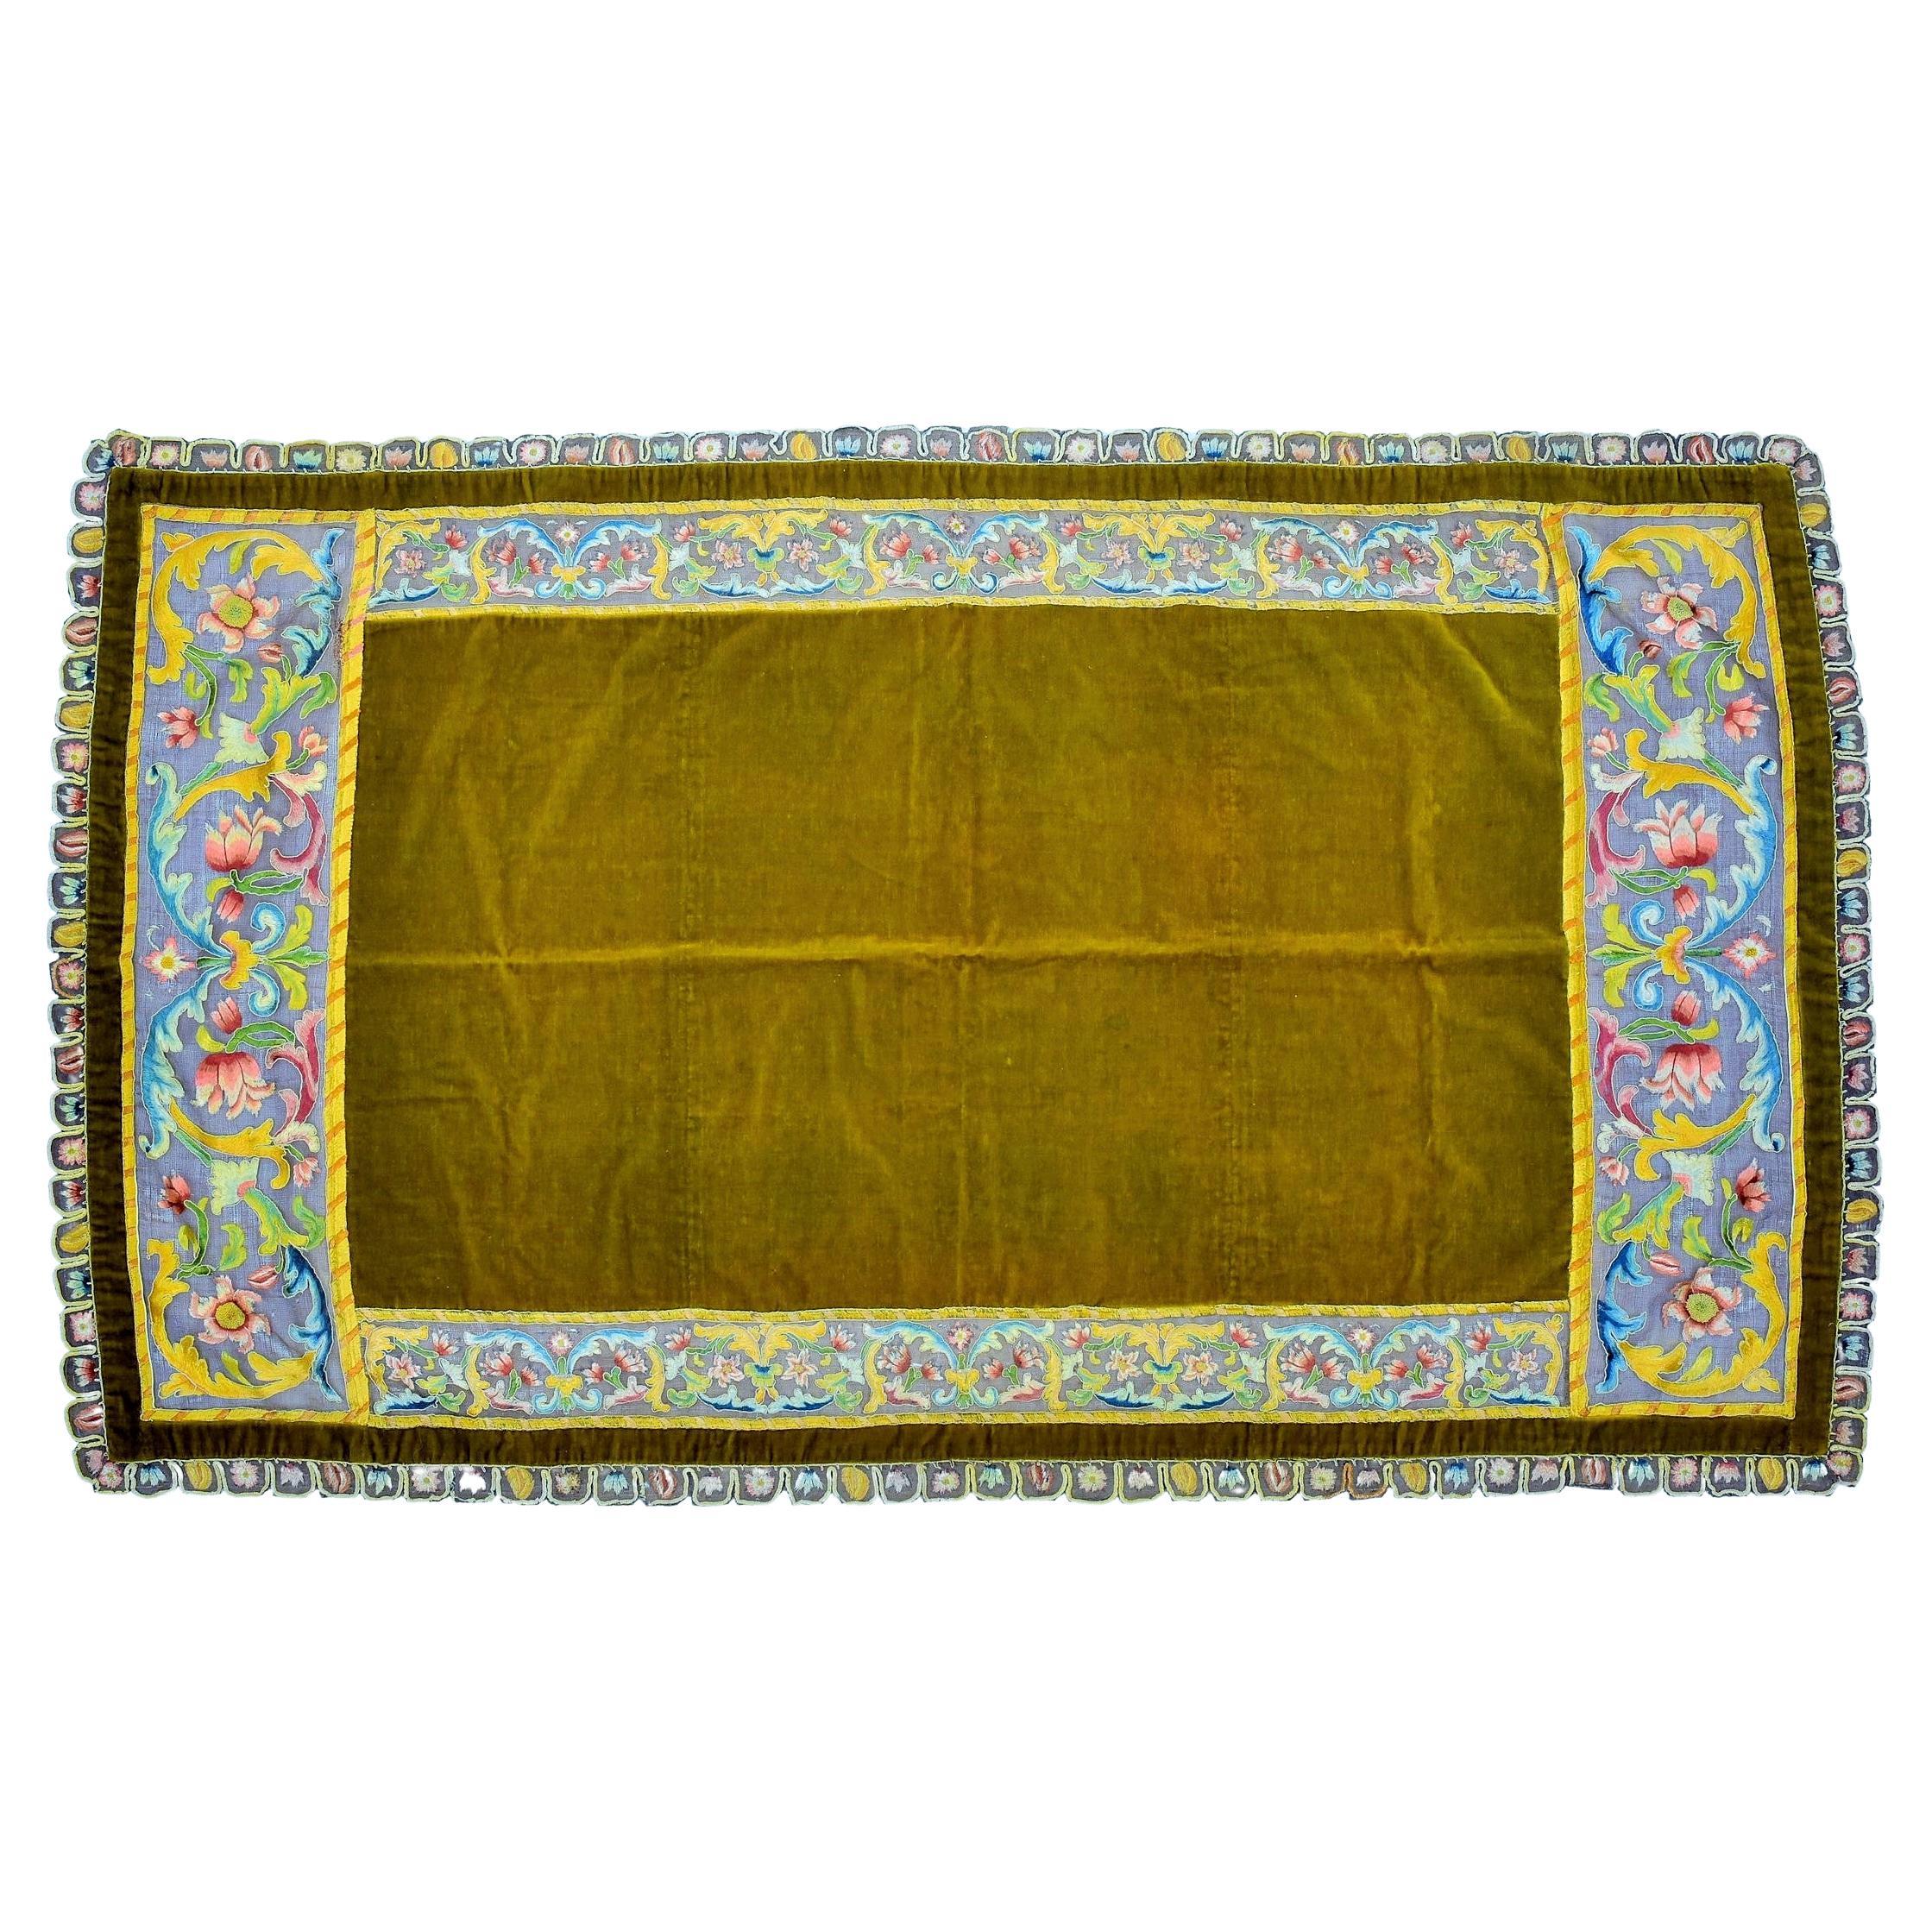 Late 17c, early 18c for the embroidery
19c for the velvet tablecloth
Italy

Rare tablecloth in green-yellow silk velvet cut (XIXth century) with wide bands and festoons of silk embroidery in needle painting on brown linen veil,  called Buratto,